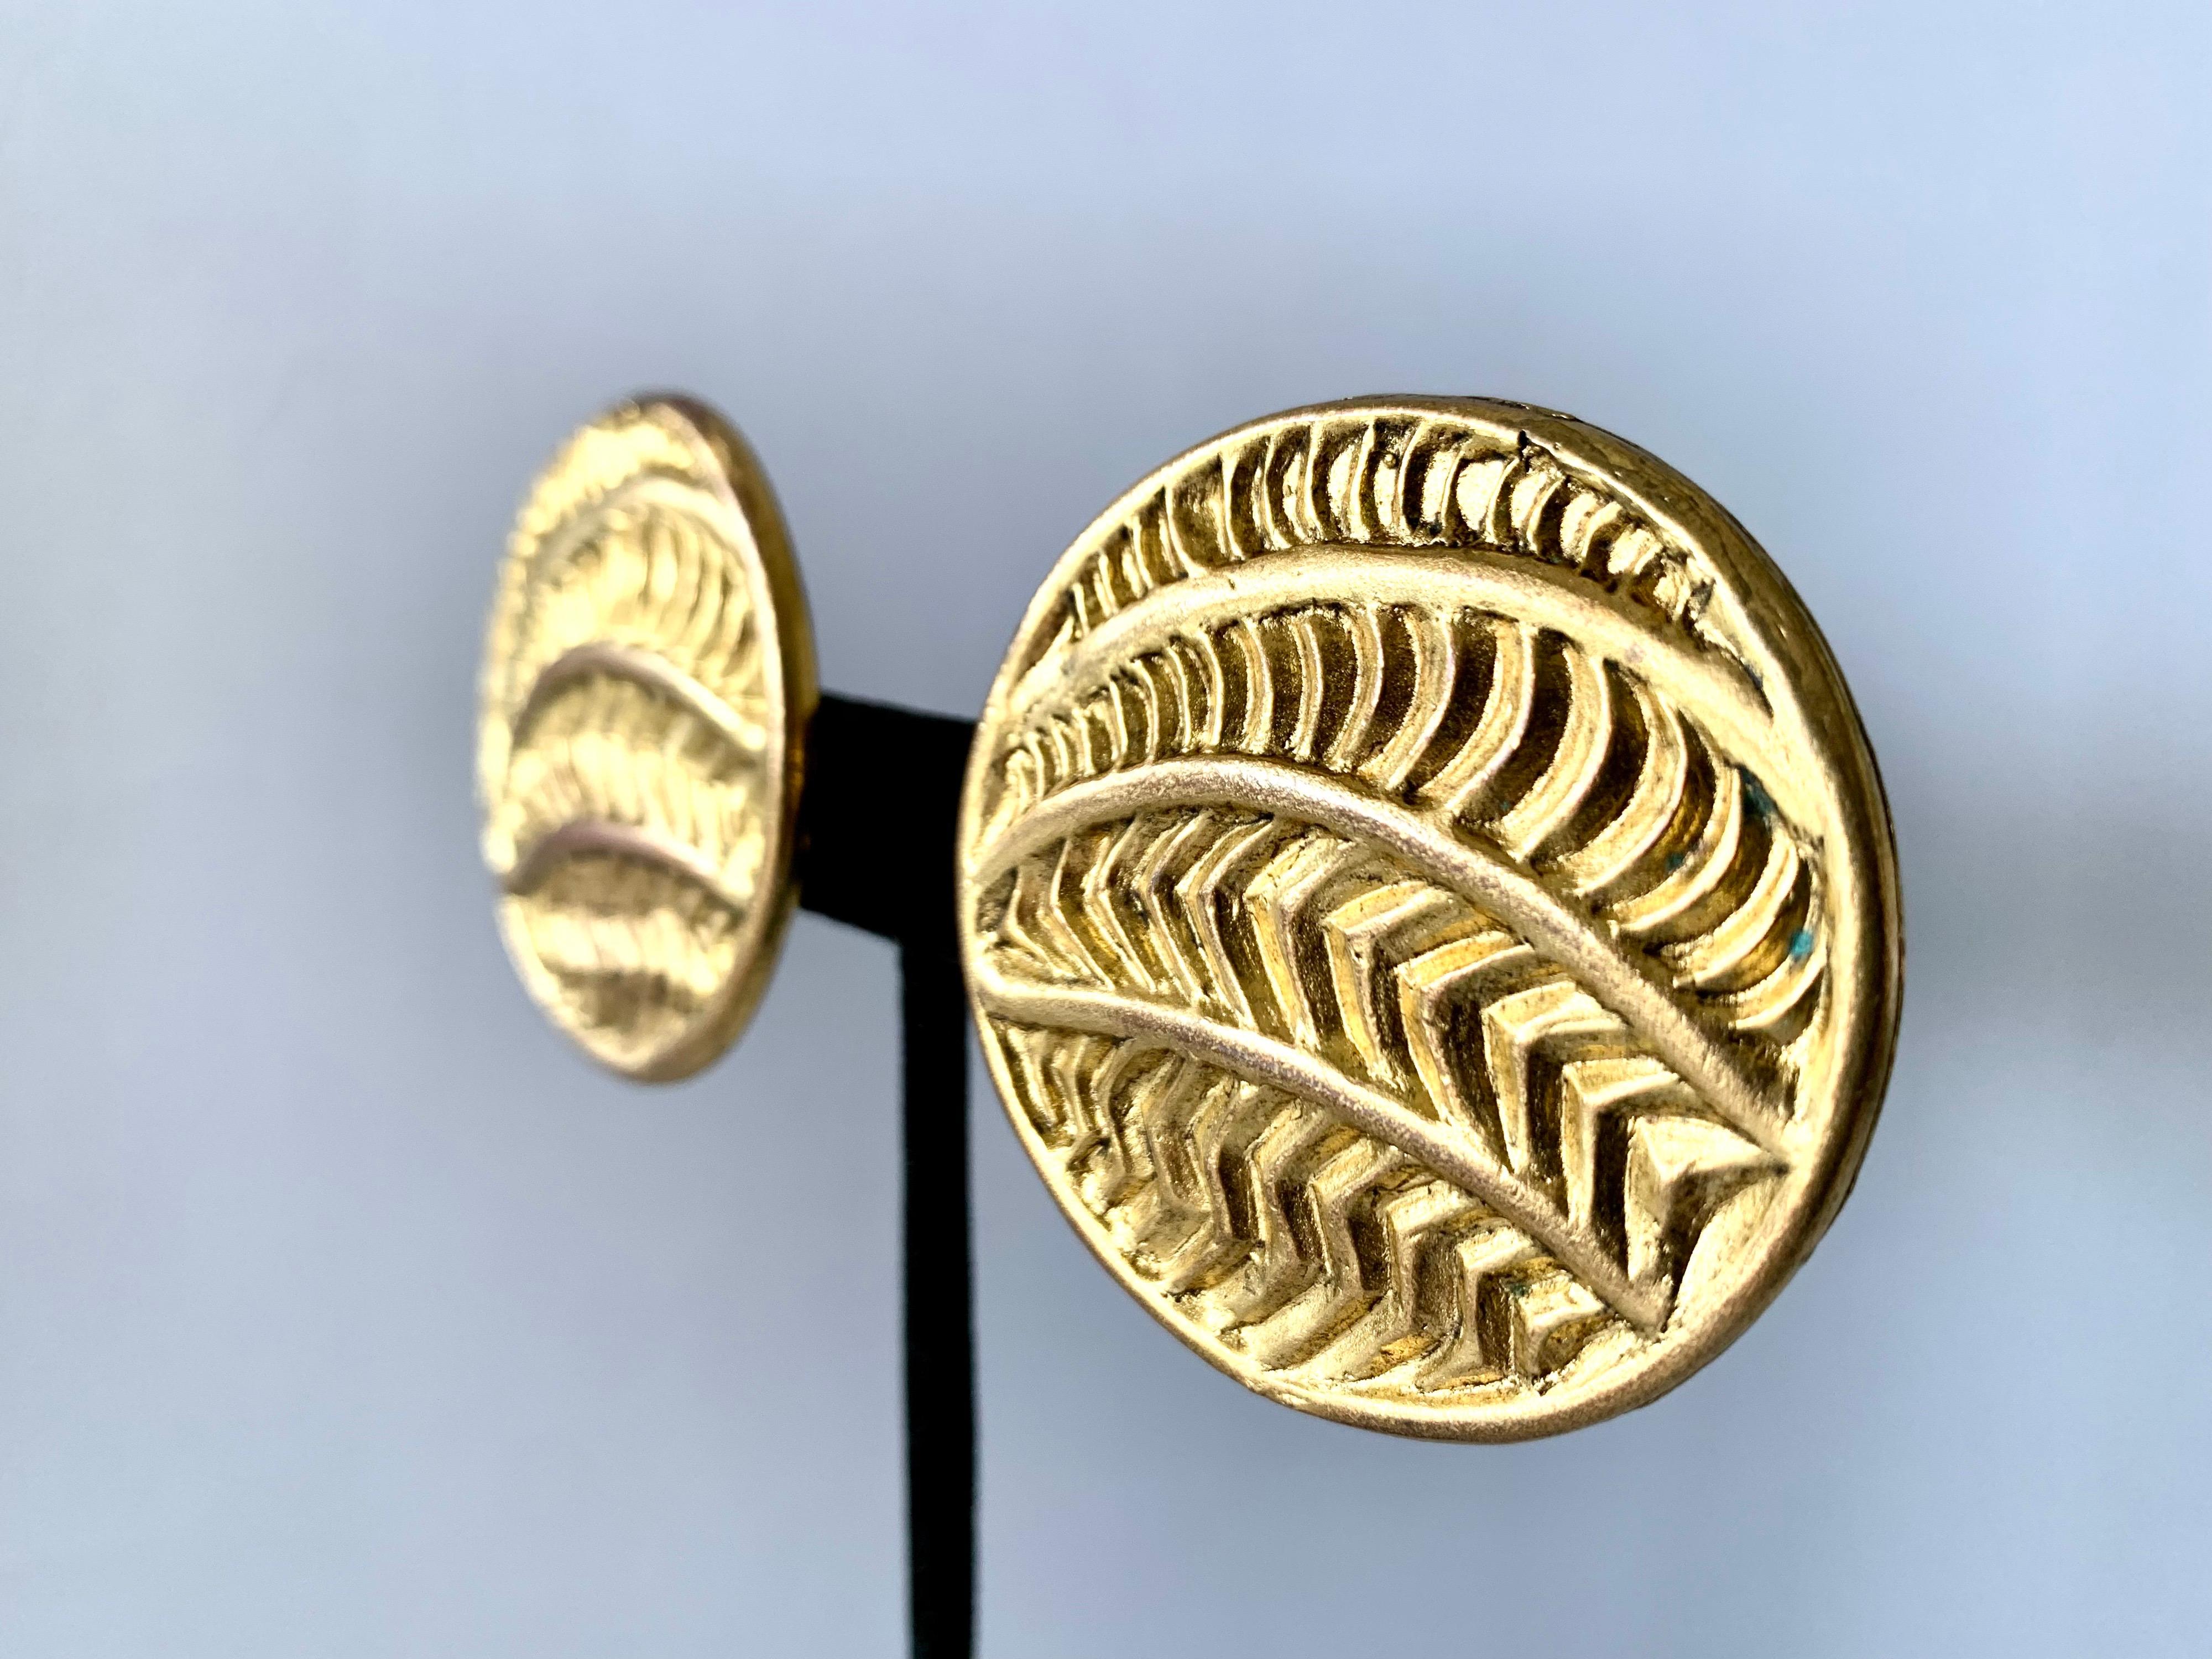 Vintage oversized round clip-on statement earrings comprised out of gilt metal featuring a carved tribal design. The earrings are signed Isabel Canovas, circa 1980-1990 made in France.

Isabel Canovas was a high fashion costume jewelry designer who